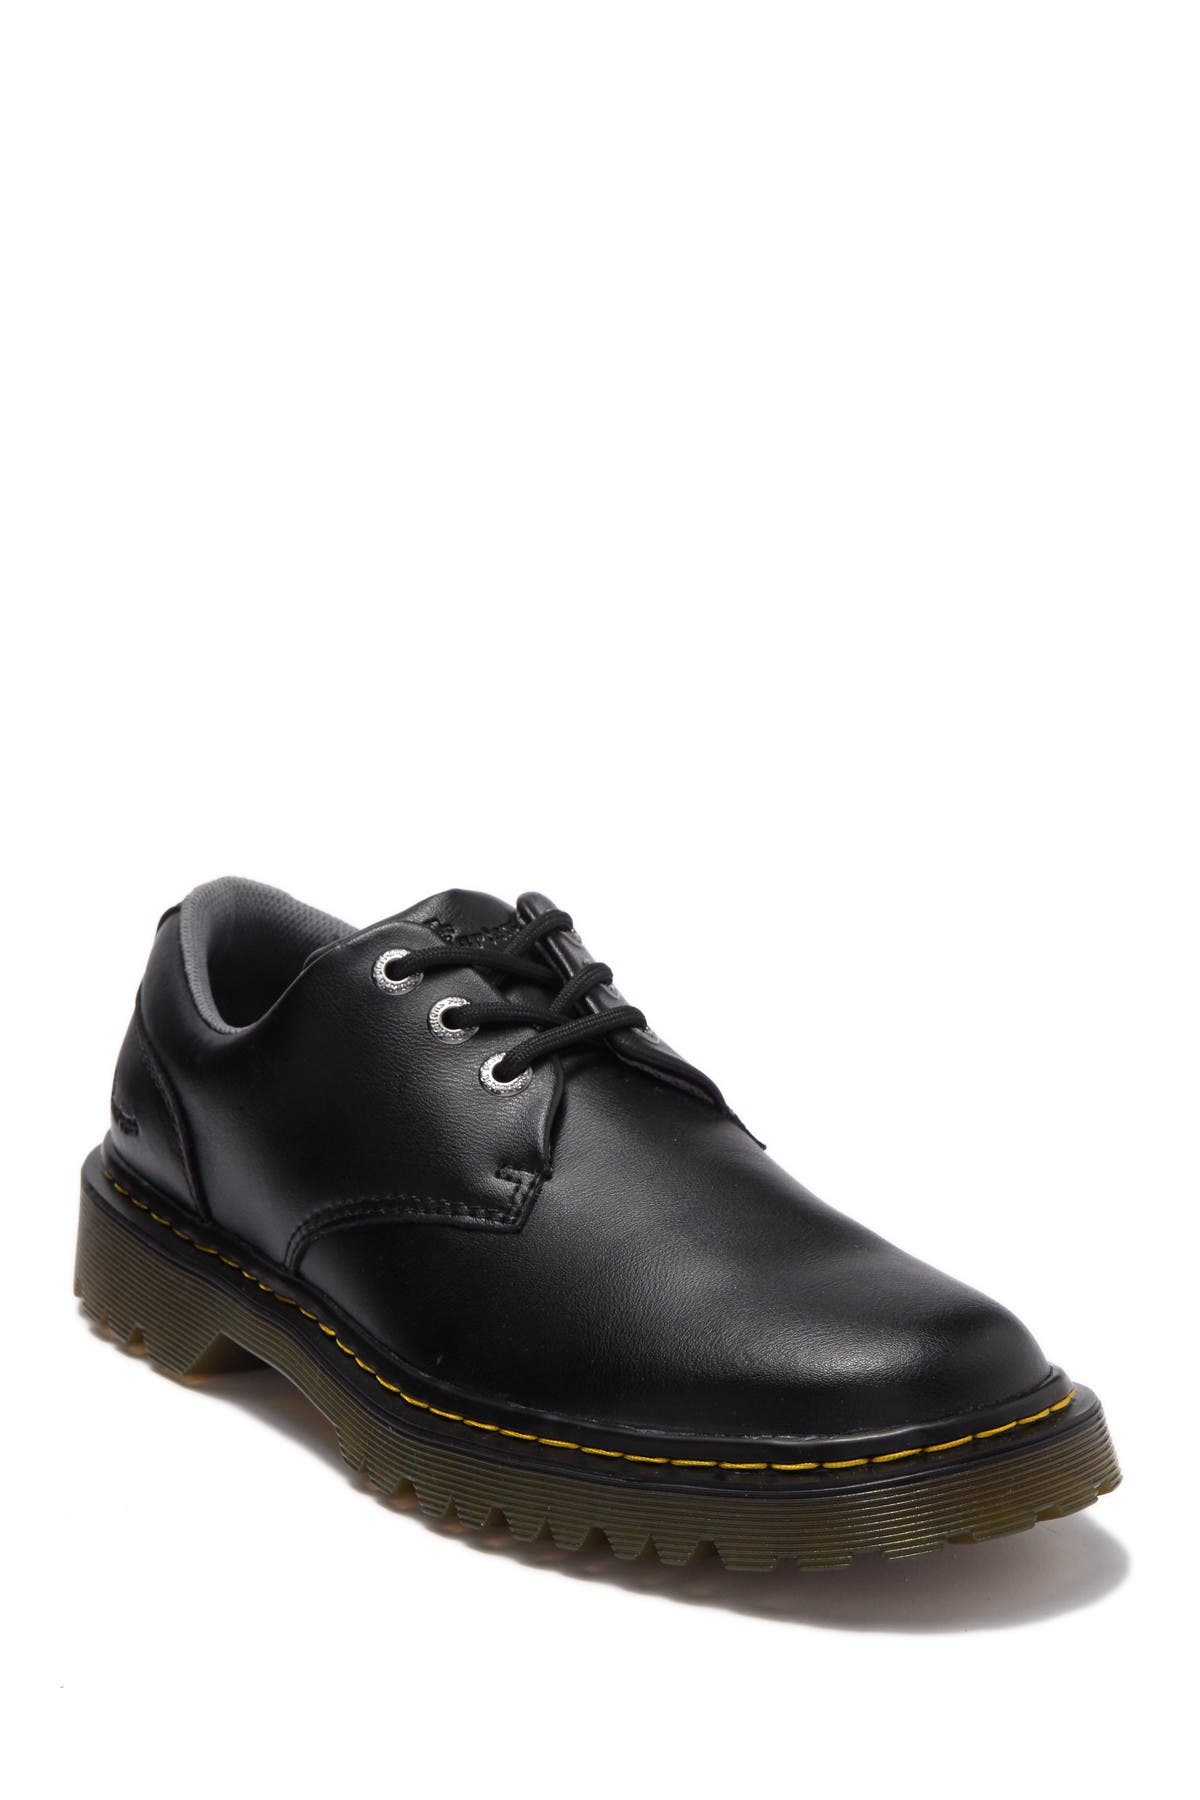 dr martens official page